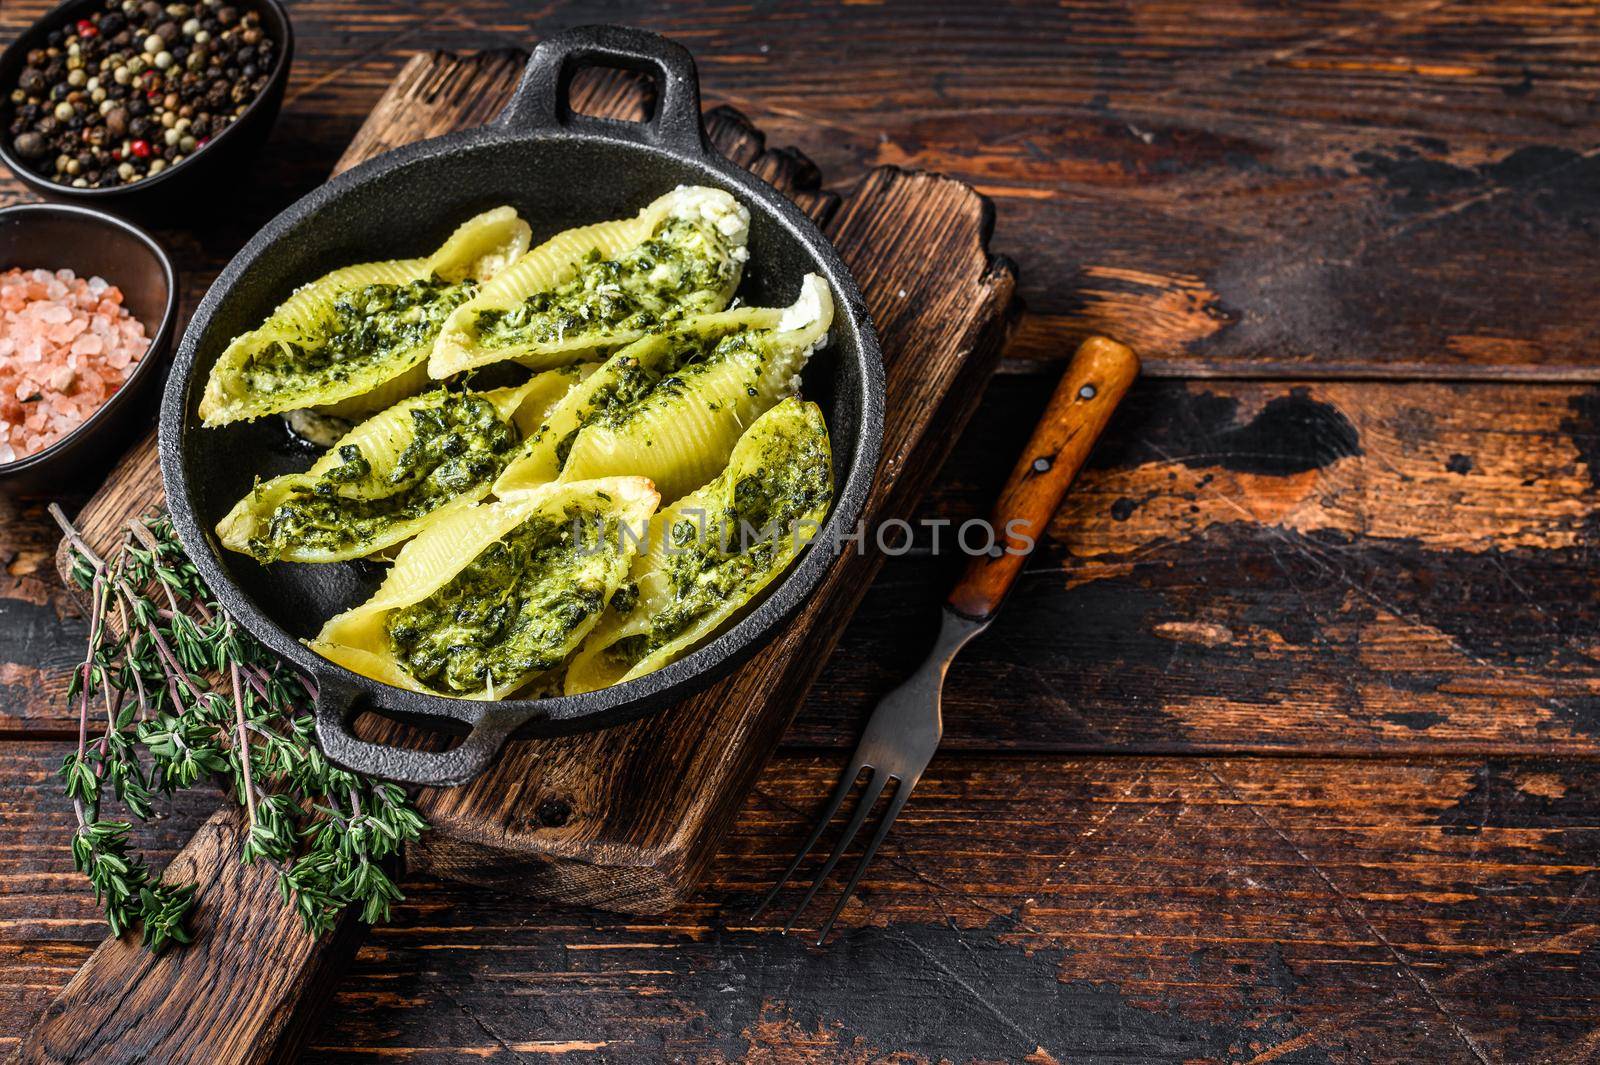 Jumbo shells italian pasta Conchiglioni konkiloni stuffed with beef meat and spinach. Wooden background. Top view. Copy space.